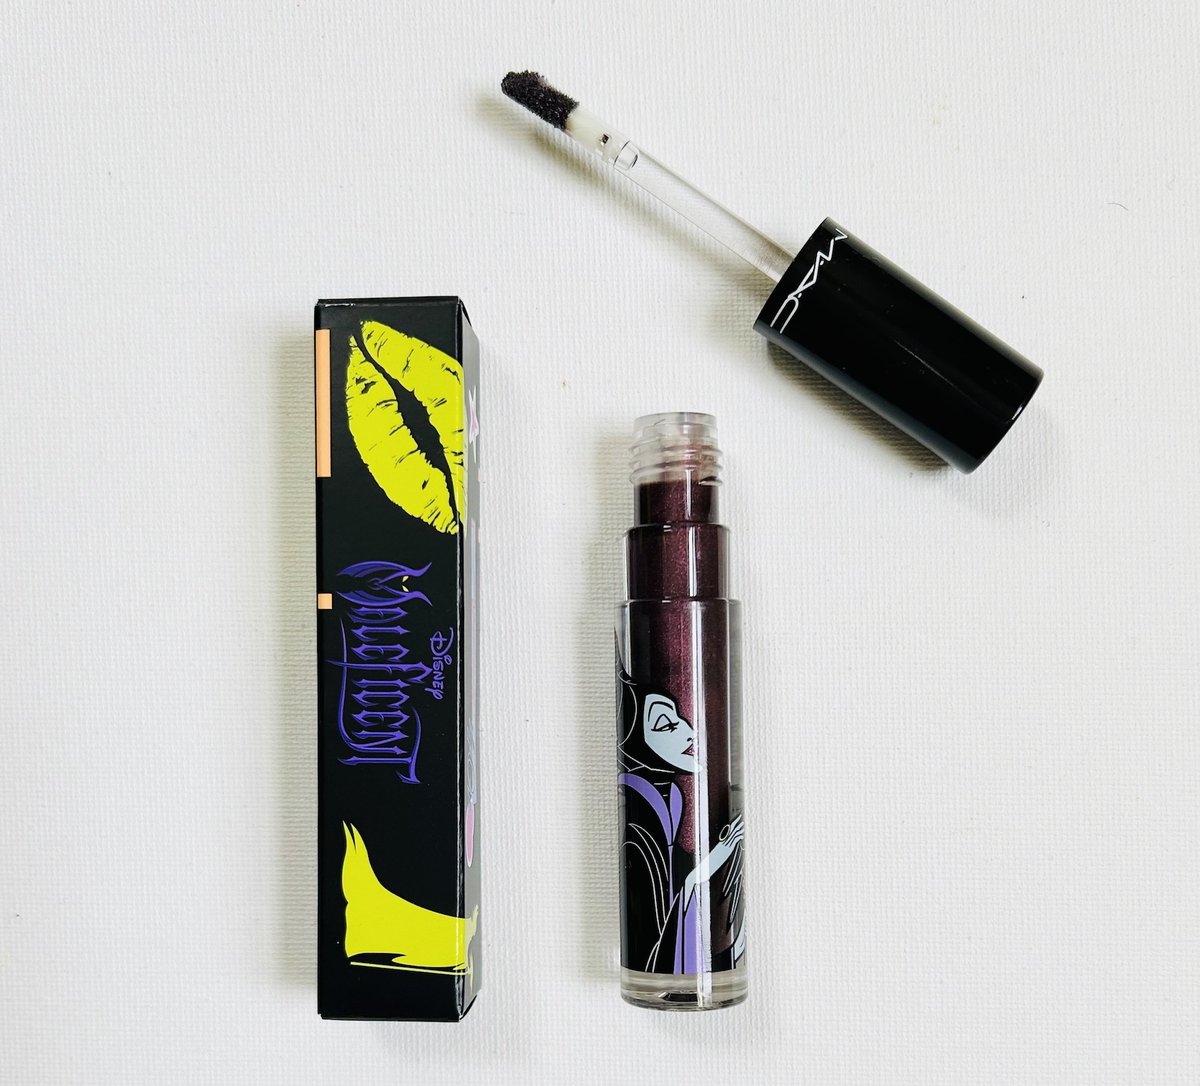 MAC Cosmetics is celebrating its 40th anniversary! So to mark the occasion, I'm giving away this MAC 40 Disney Favourites Maleficent Lipglass in shade 'Wrong Spell' on TwitterX. To enter, follow @davelackie & RT #win (ends 05/20) It's a plum shade with a glass-like shine.